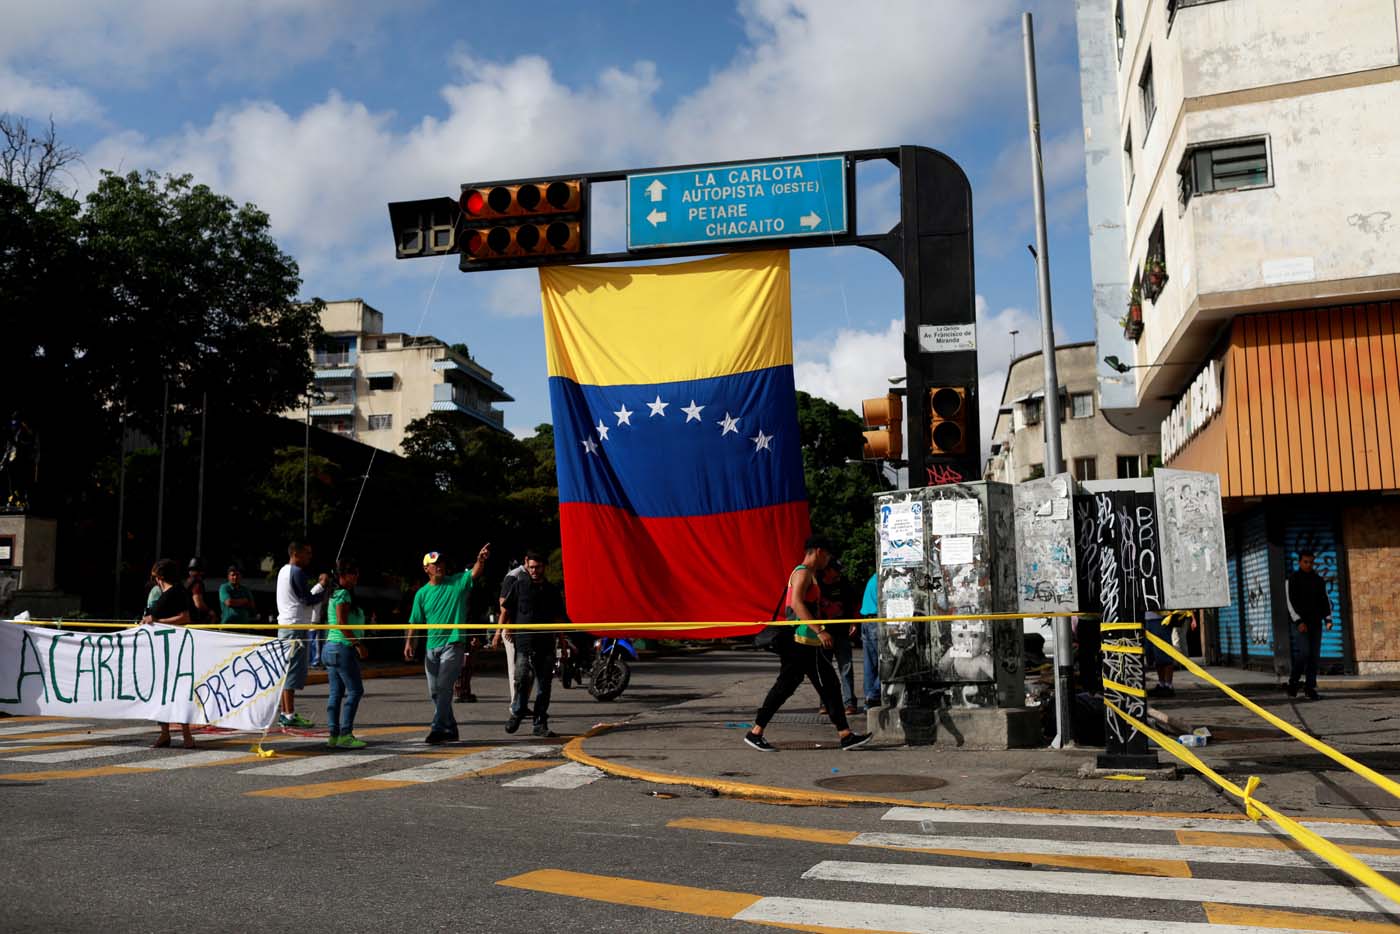 People walk along an empty street during a strike called to protest against Venezuelan President Nicolas Maduro's government in Caracas, Venezuela, July 20, 2017. REUTERS/Marco Bello